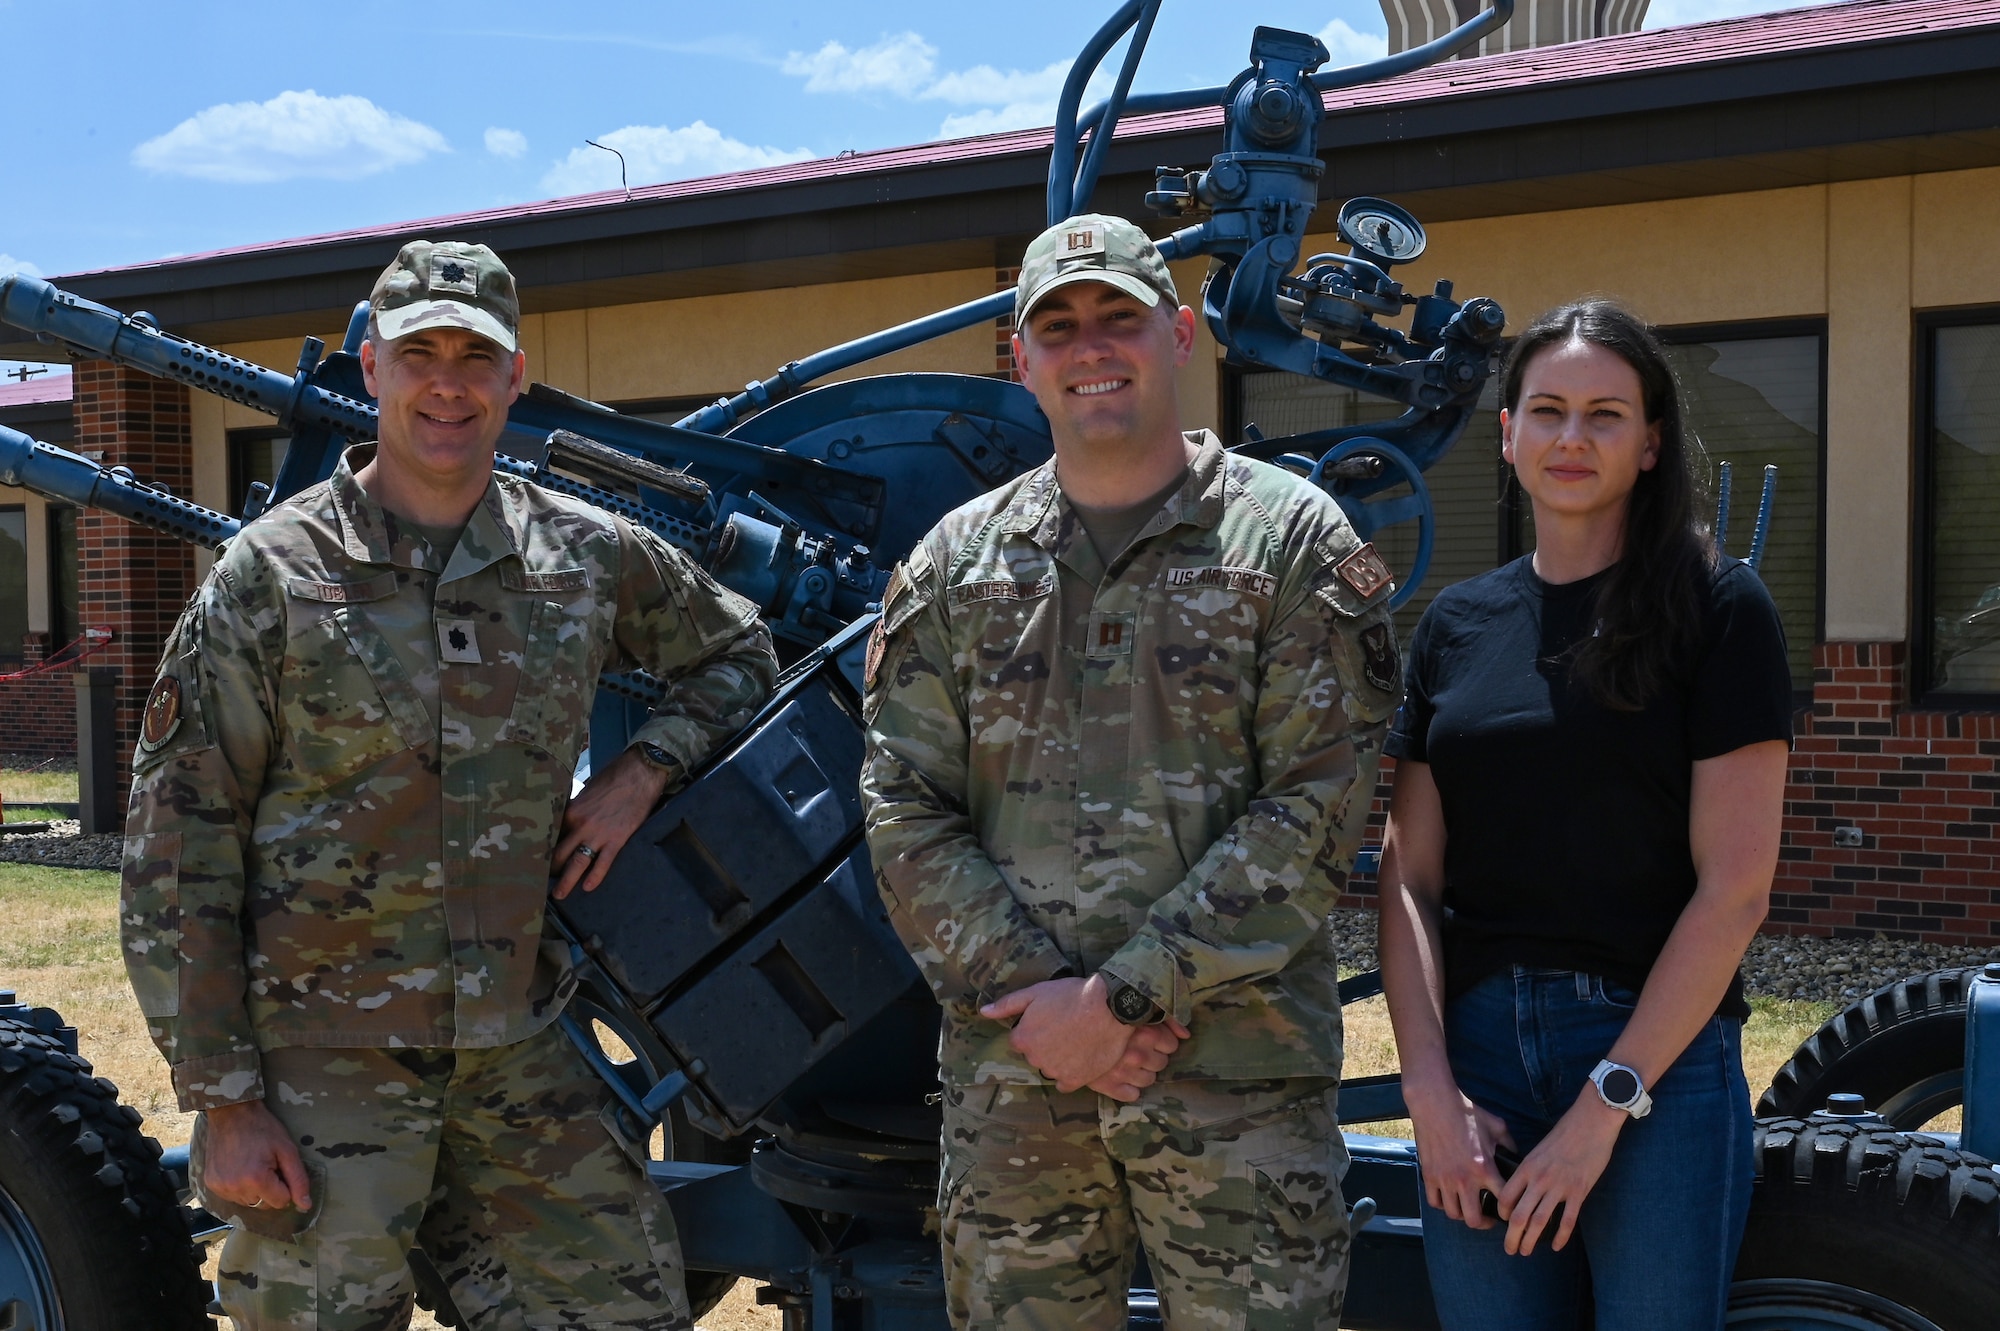 Members of the Dyess Operational Support Team pose in front of the 317th Airlift Wing combined building at Dyess Air Force Base, Texas, Aug. 24, 2023. OST typically consists of four members: a physical therapist, strength and conditioning coach, team specialist and a mental health professional. (U.S. Air Force photo by Senior Airman Sophia Robello)